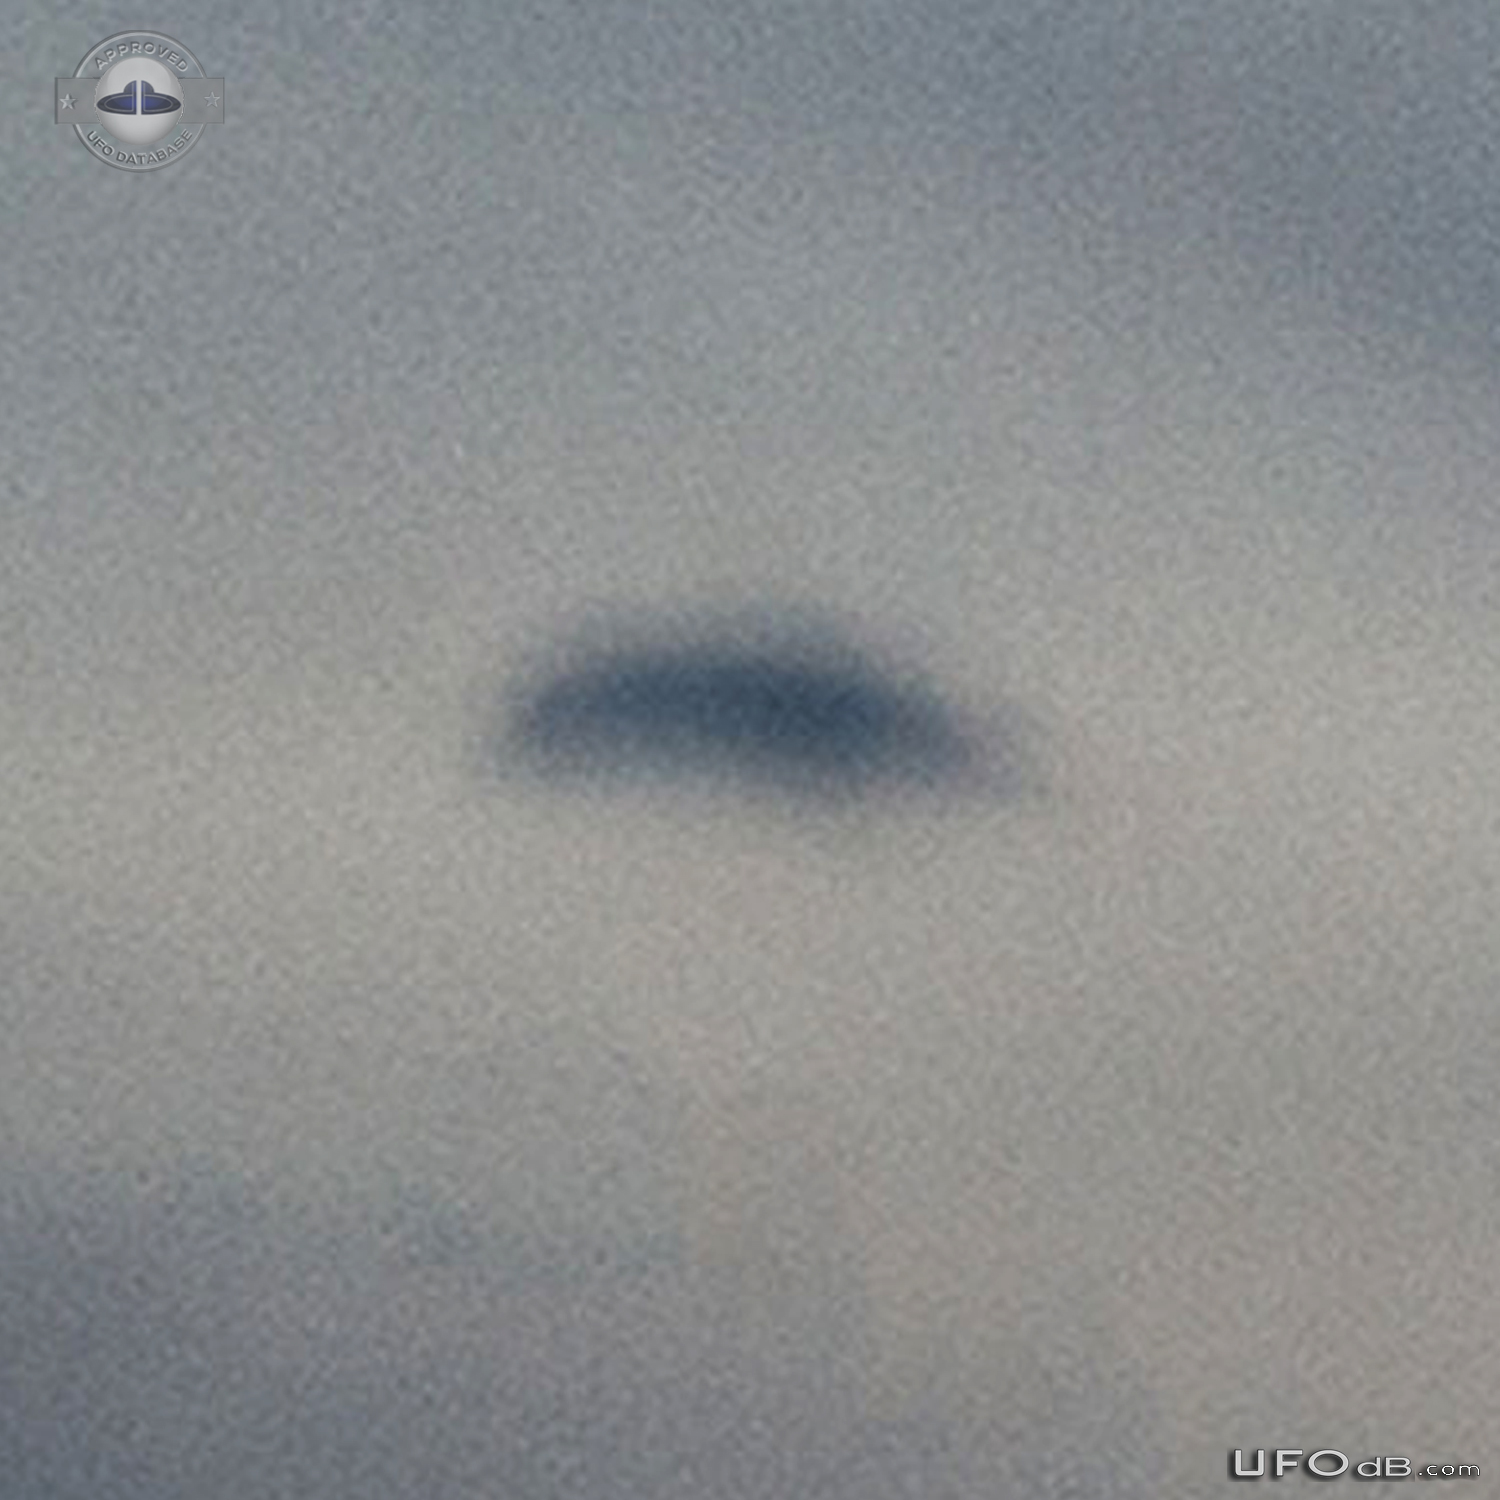 Hovering disc UFO moved then disappeared in the clouds Brisbane Queens UFO Picture #776-5